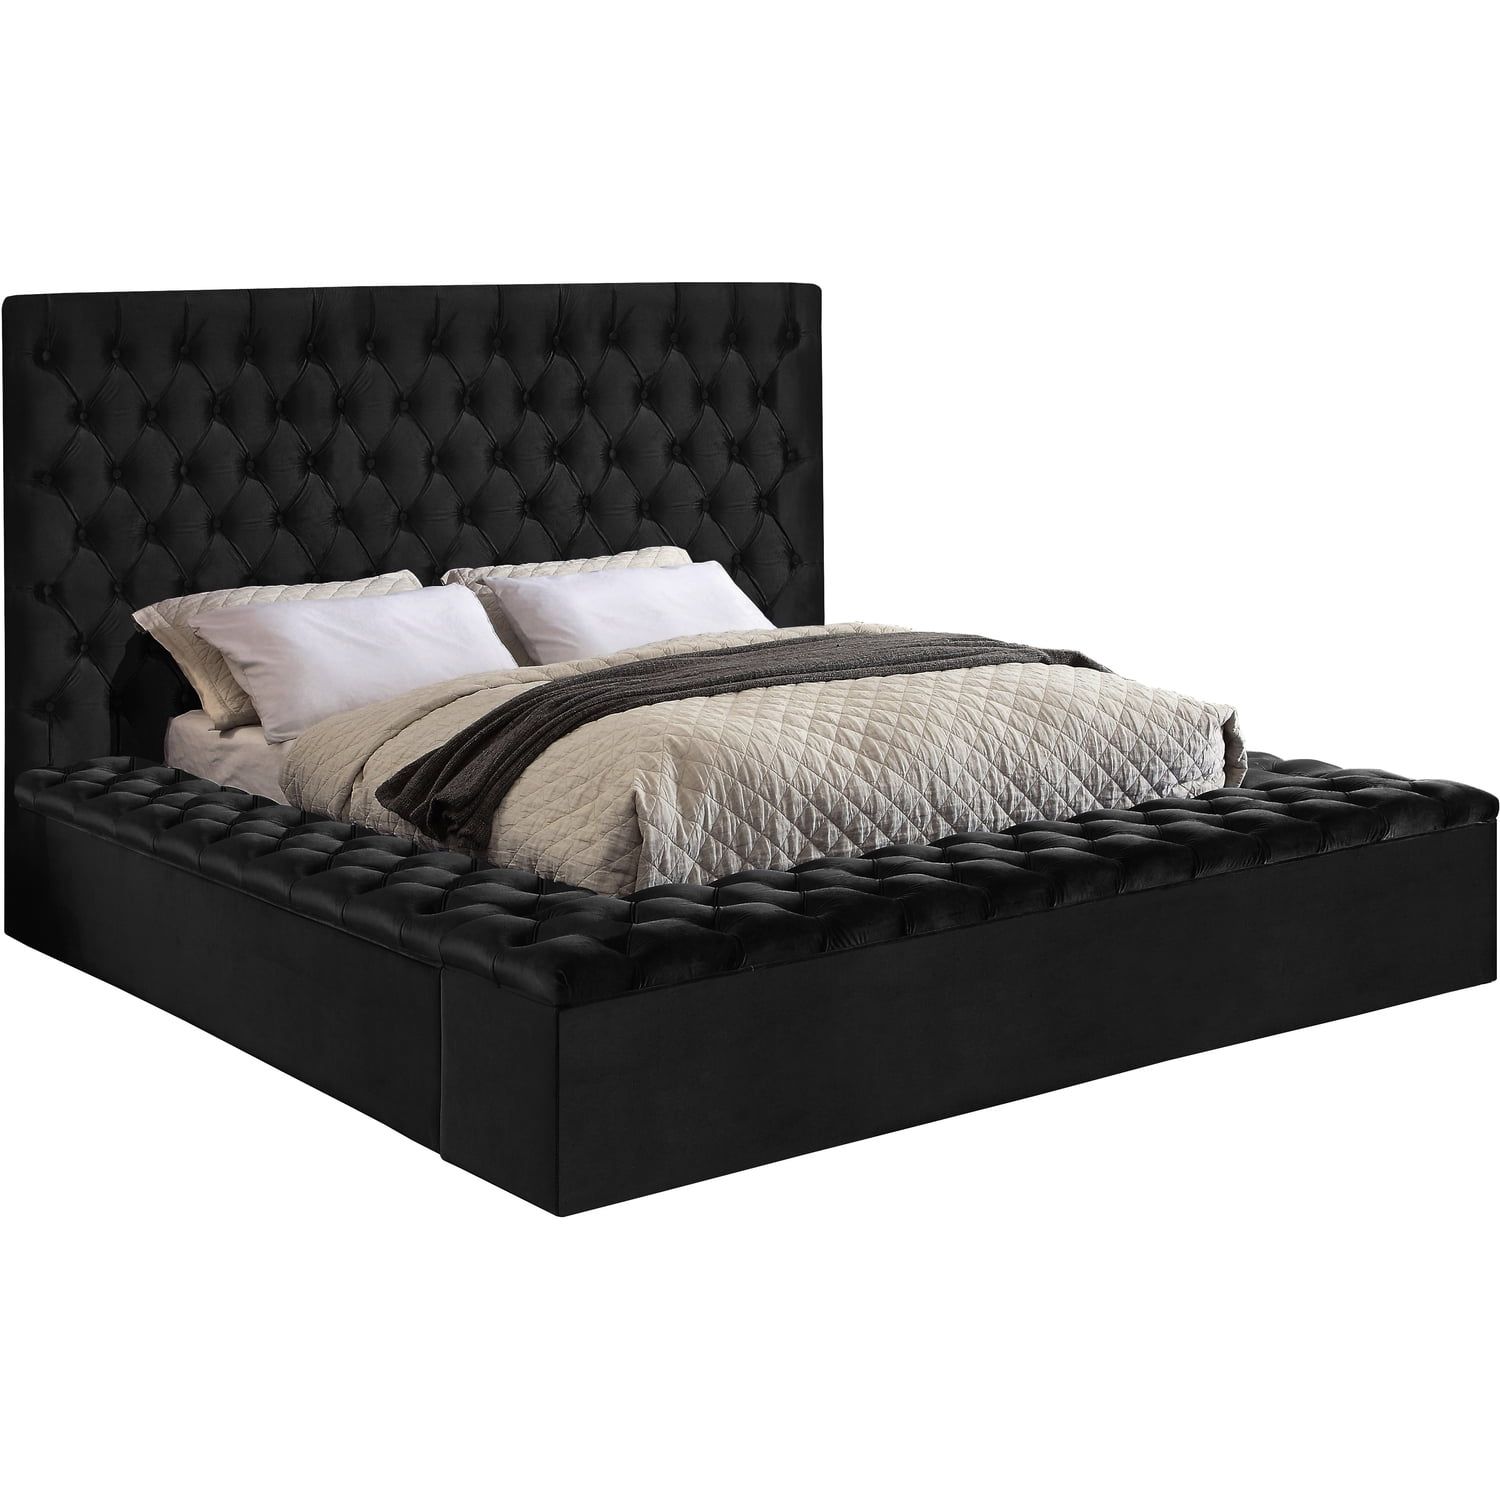 Elegant Black Velvet Queen Bed with Tufted Headboard and Storage